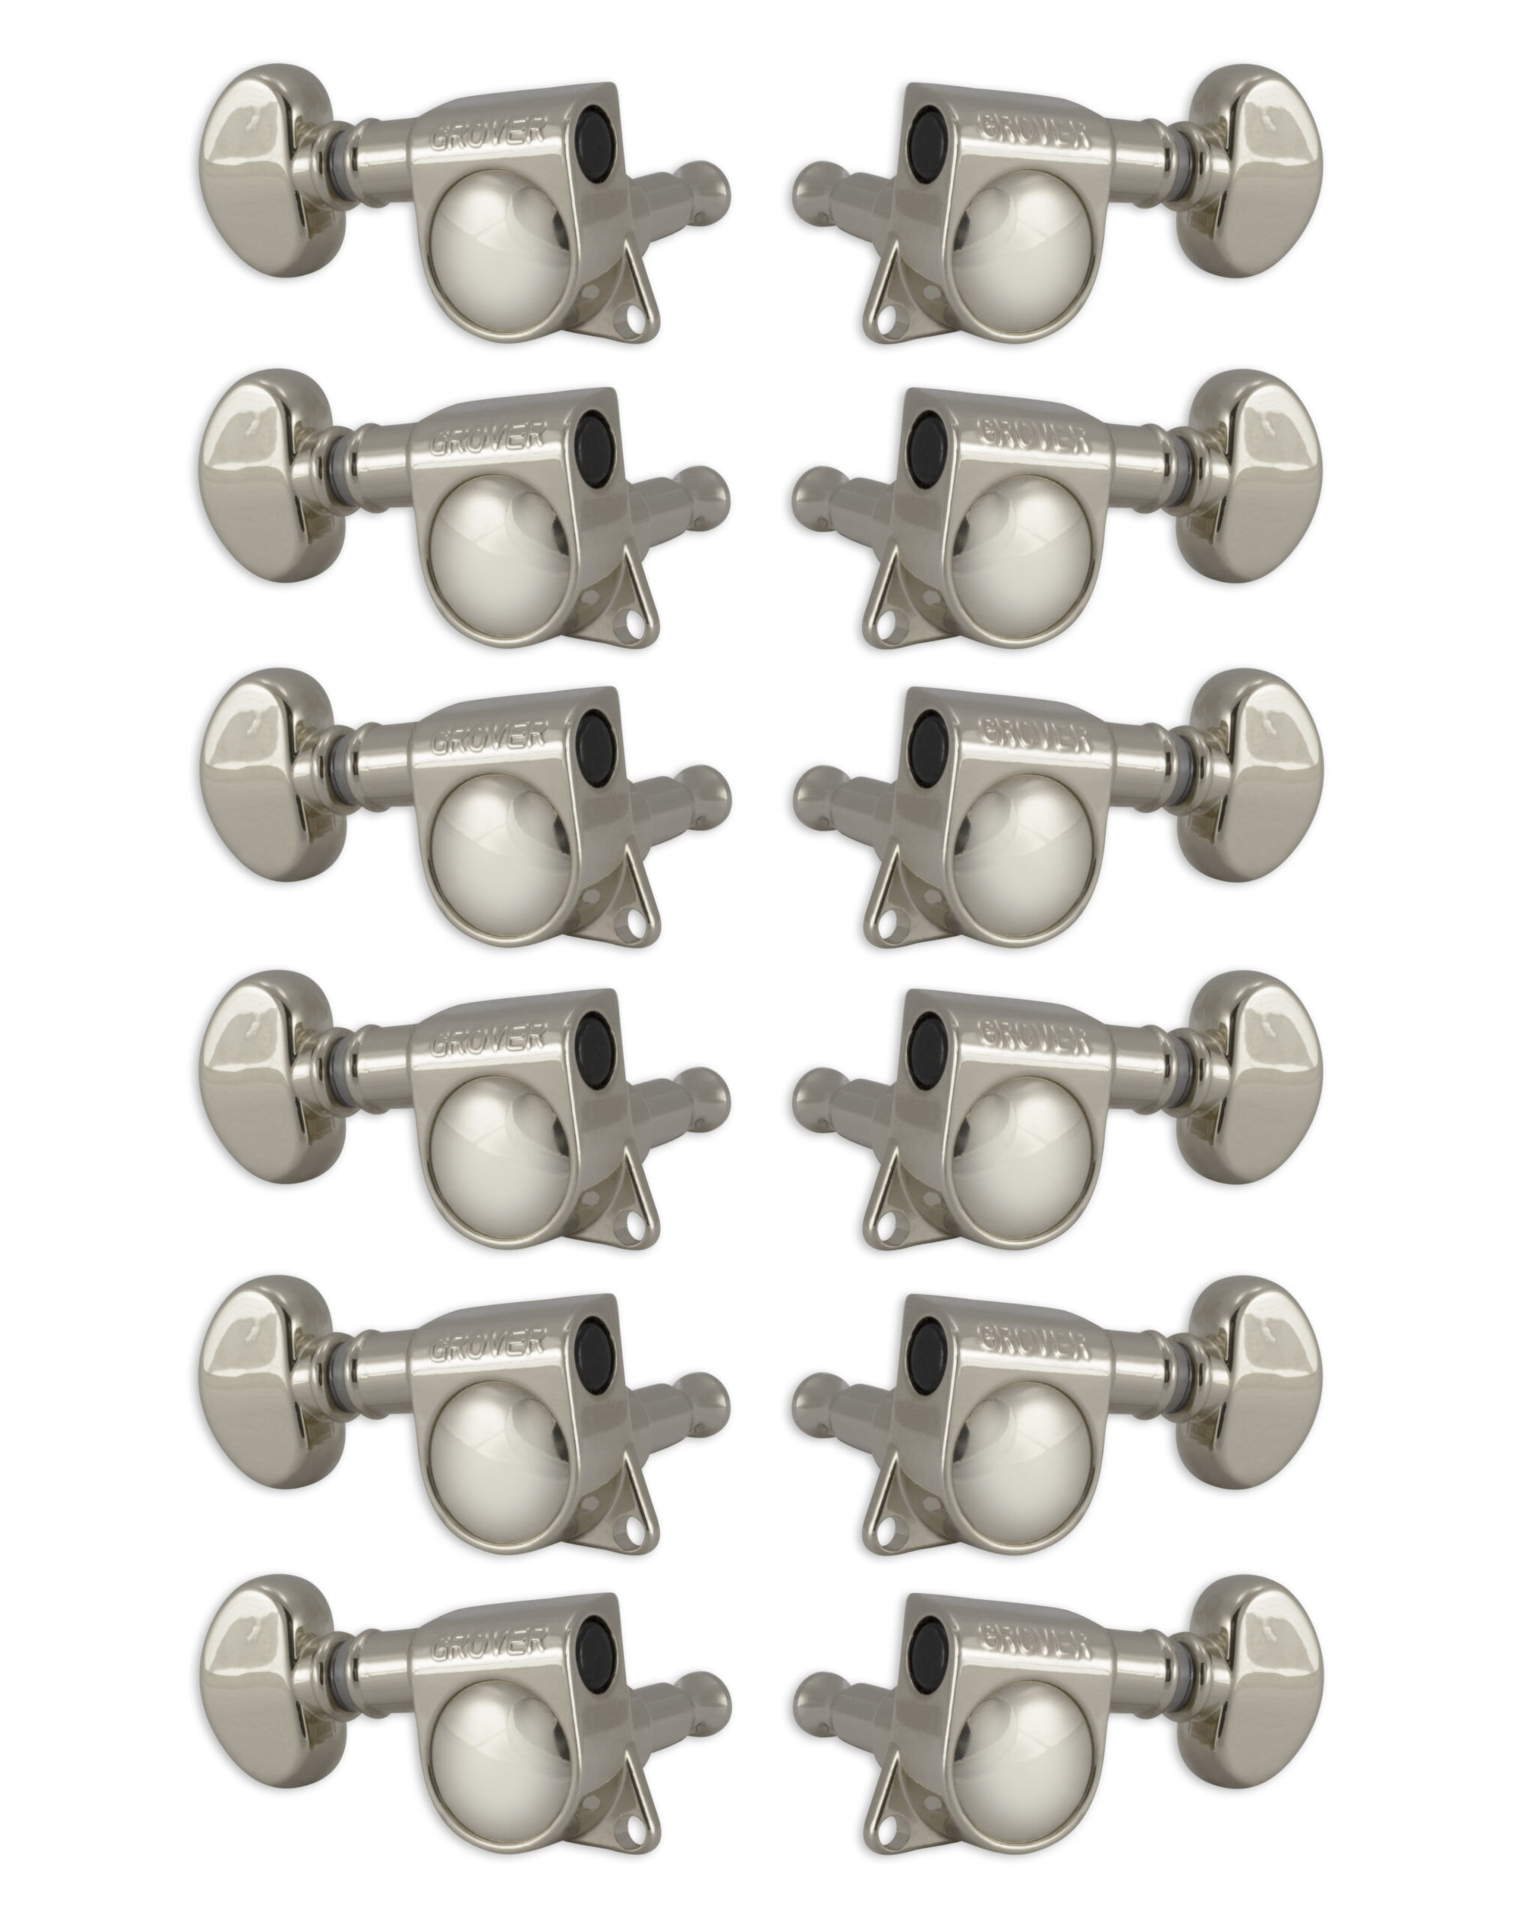 Grover 305N12 Mid-Size Rotomatics with Round Button - 12-String Guitar Machine Heads, 6 + 6 - Nickel